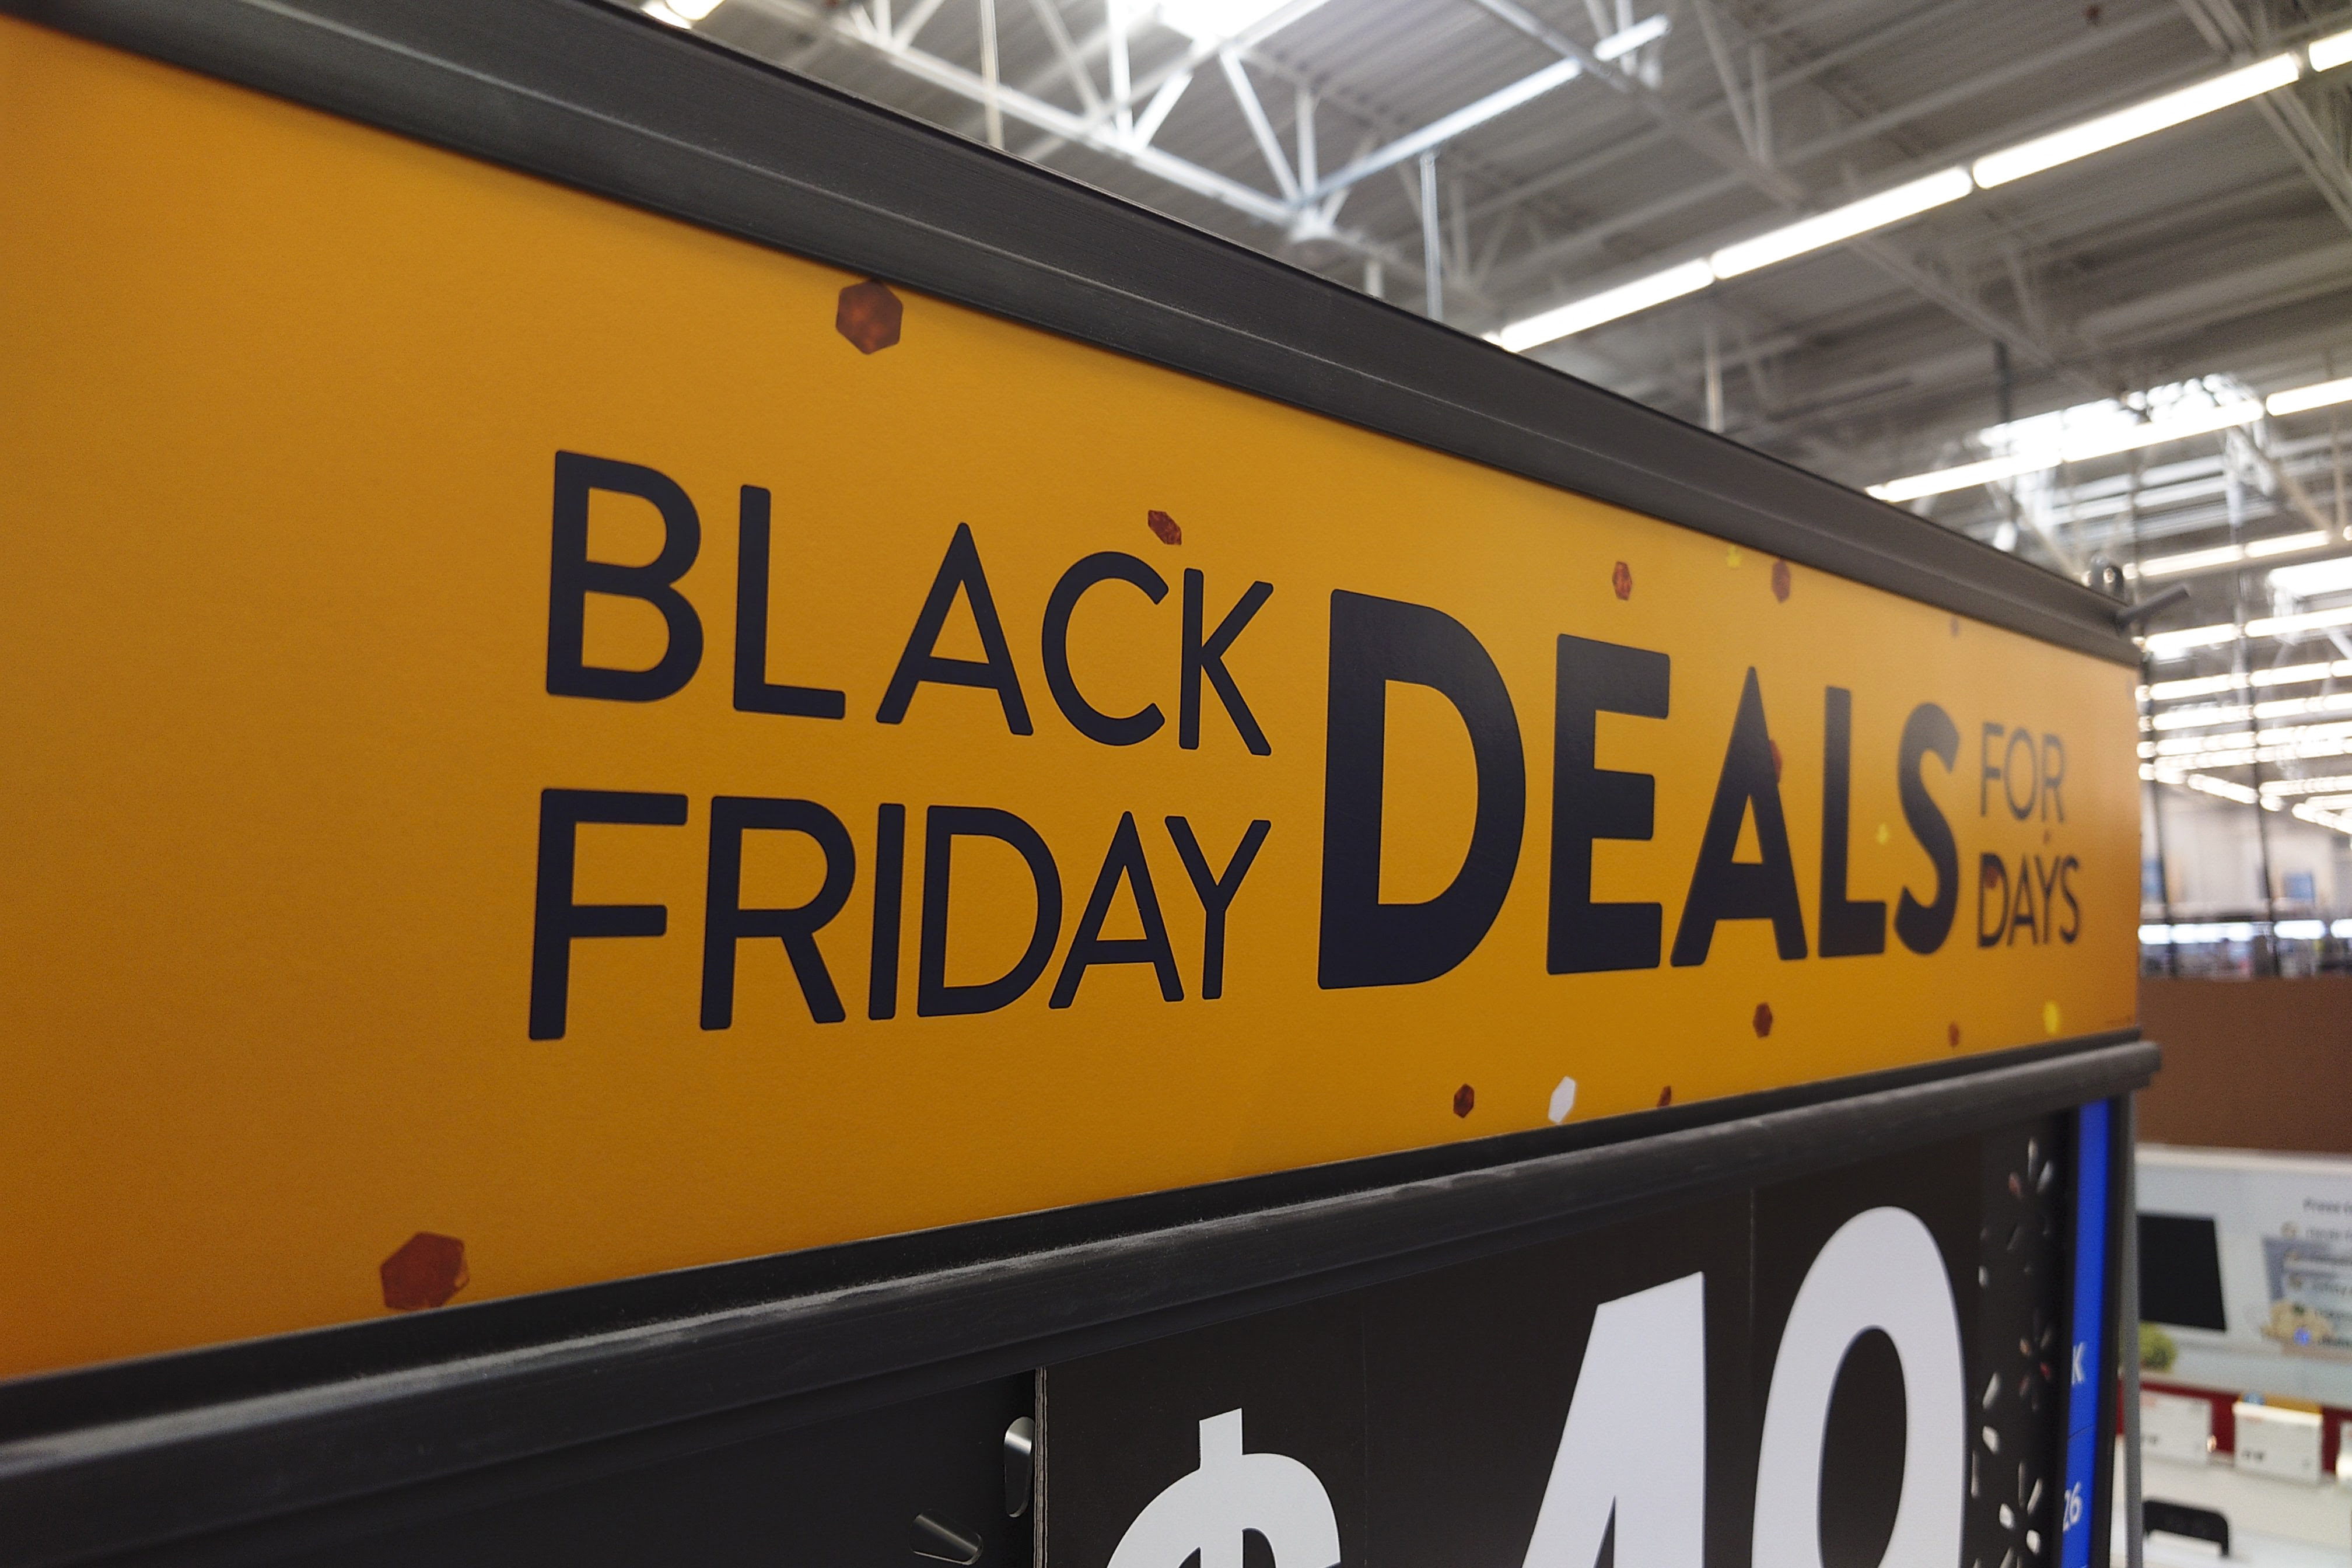 Why do we call it Black Friday?